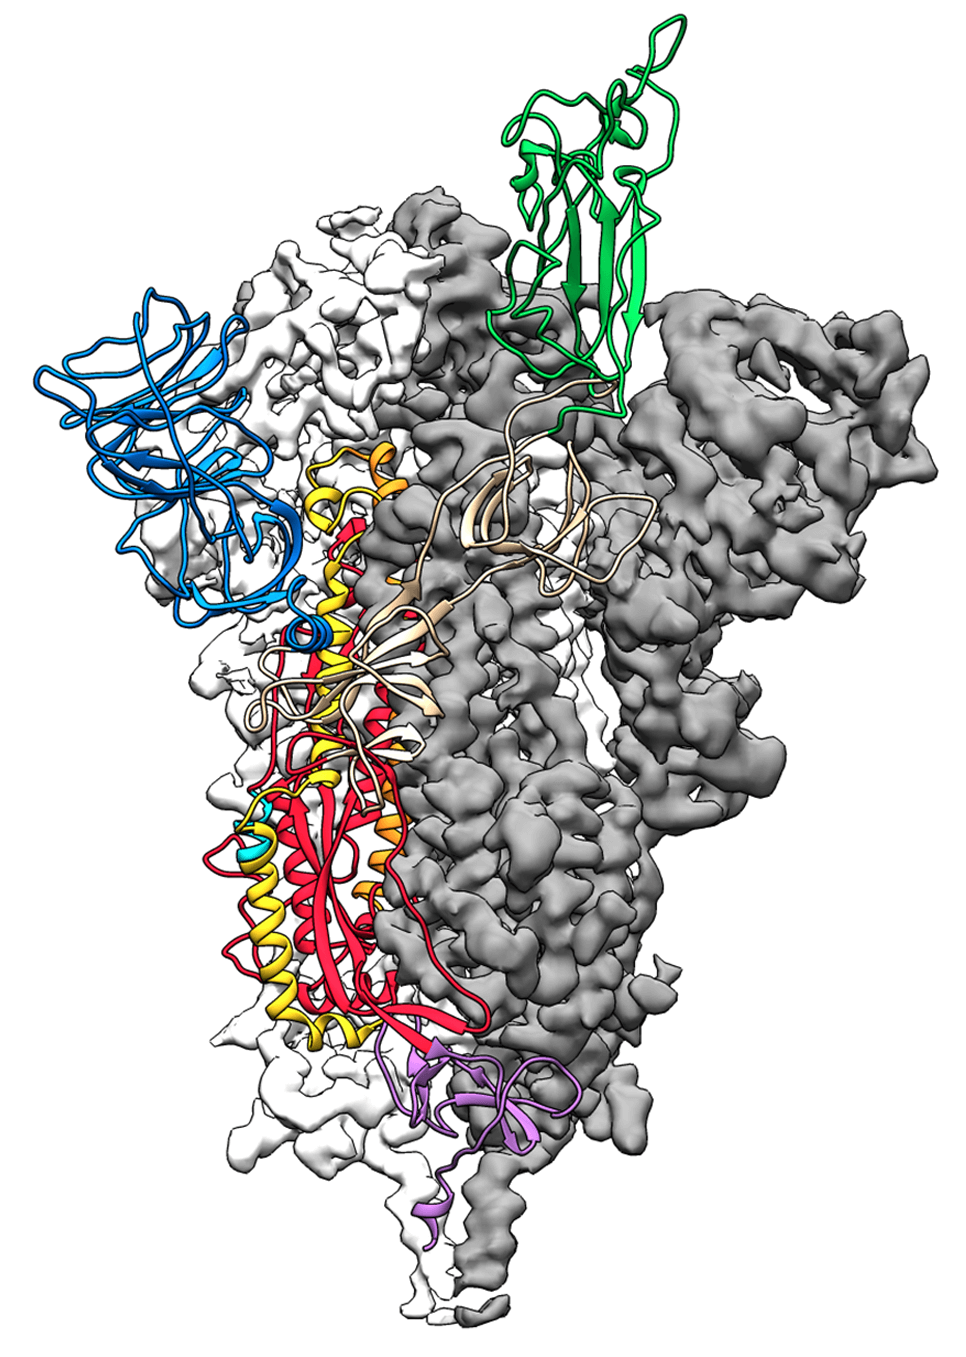 Cryo-EM structure of the 2019-nCoV spike protein